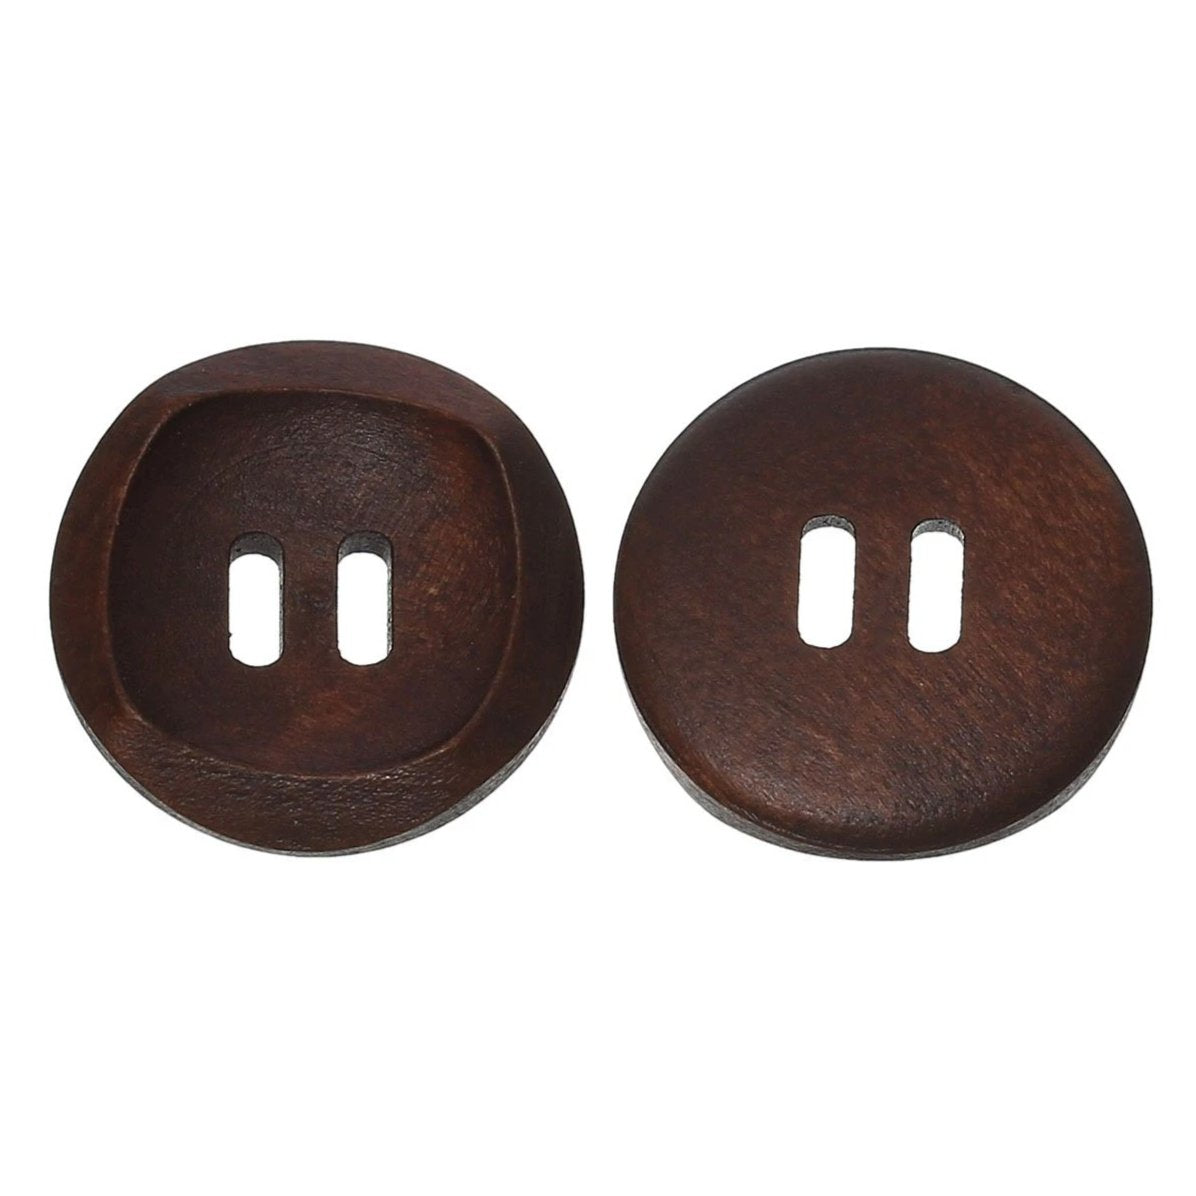 1 inch Brown wooden sewing buttons - set of 6 natural wood button 25mm